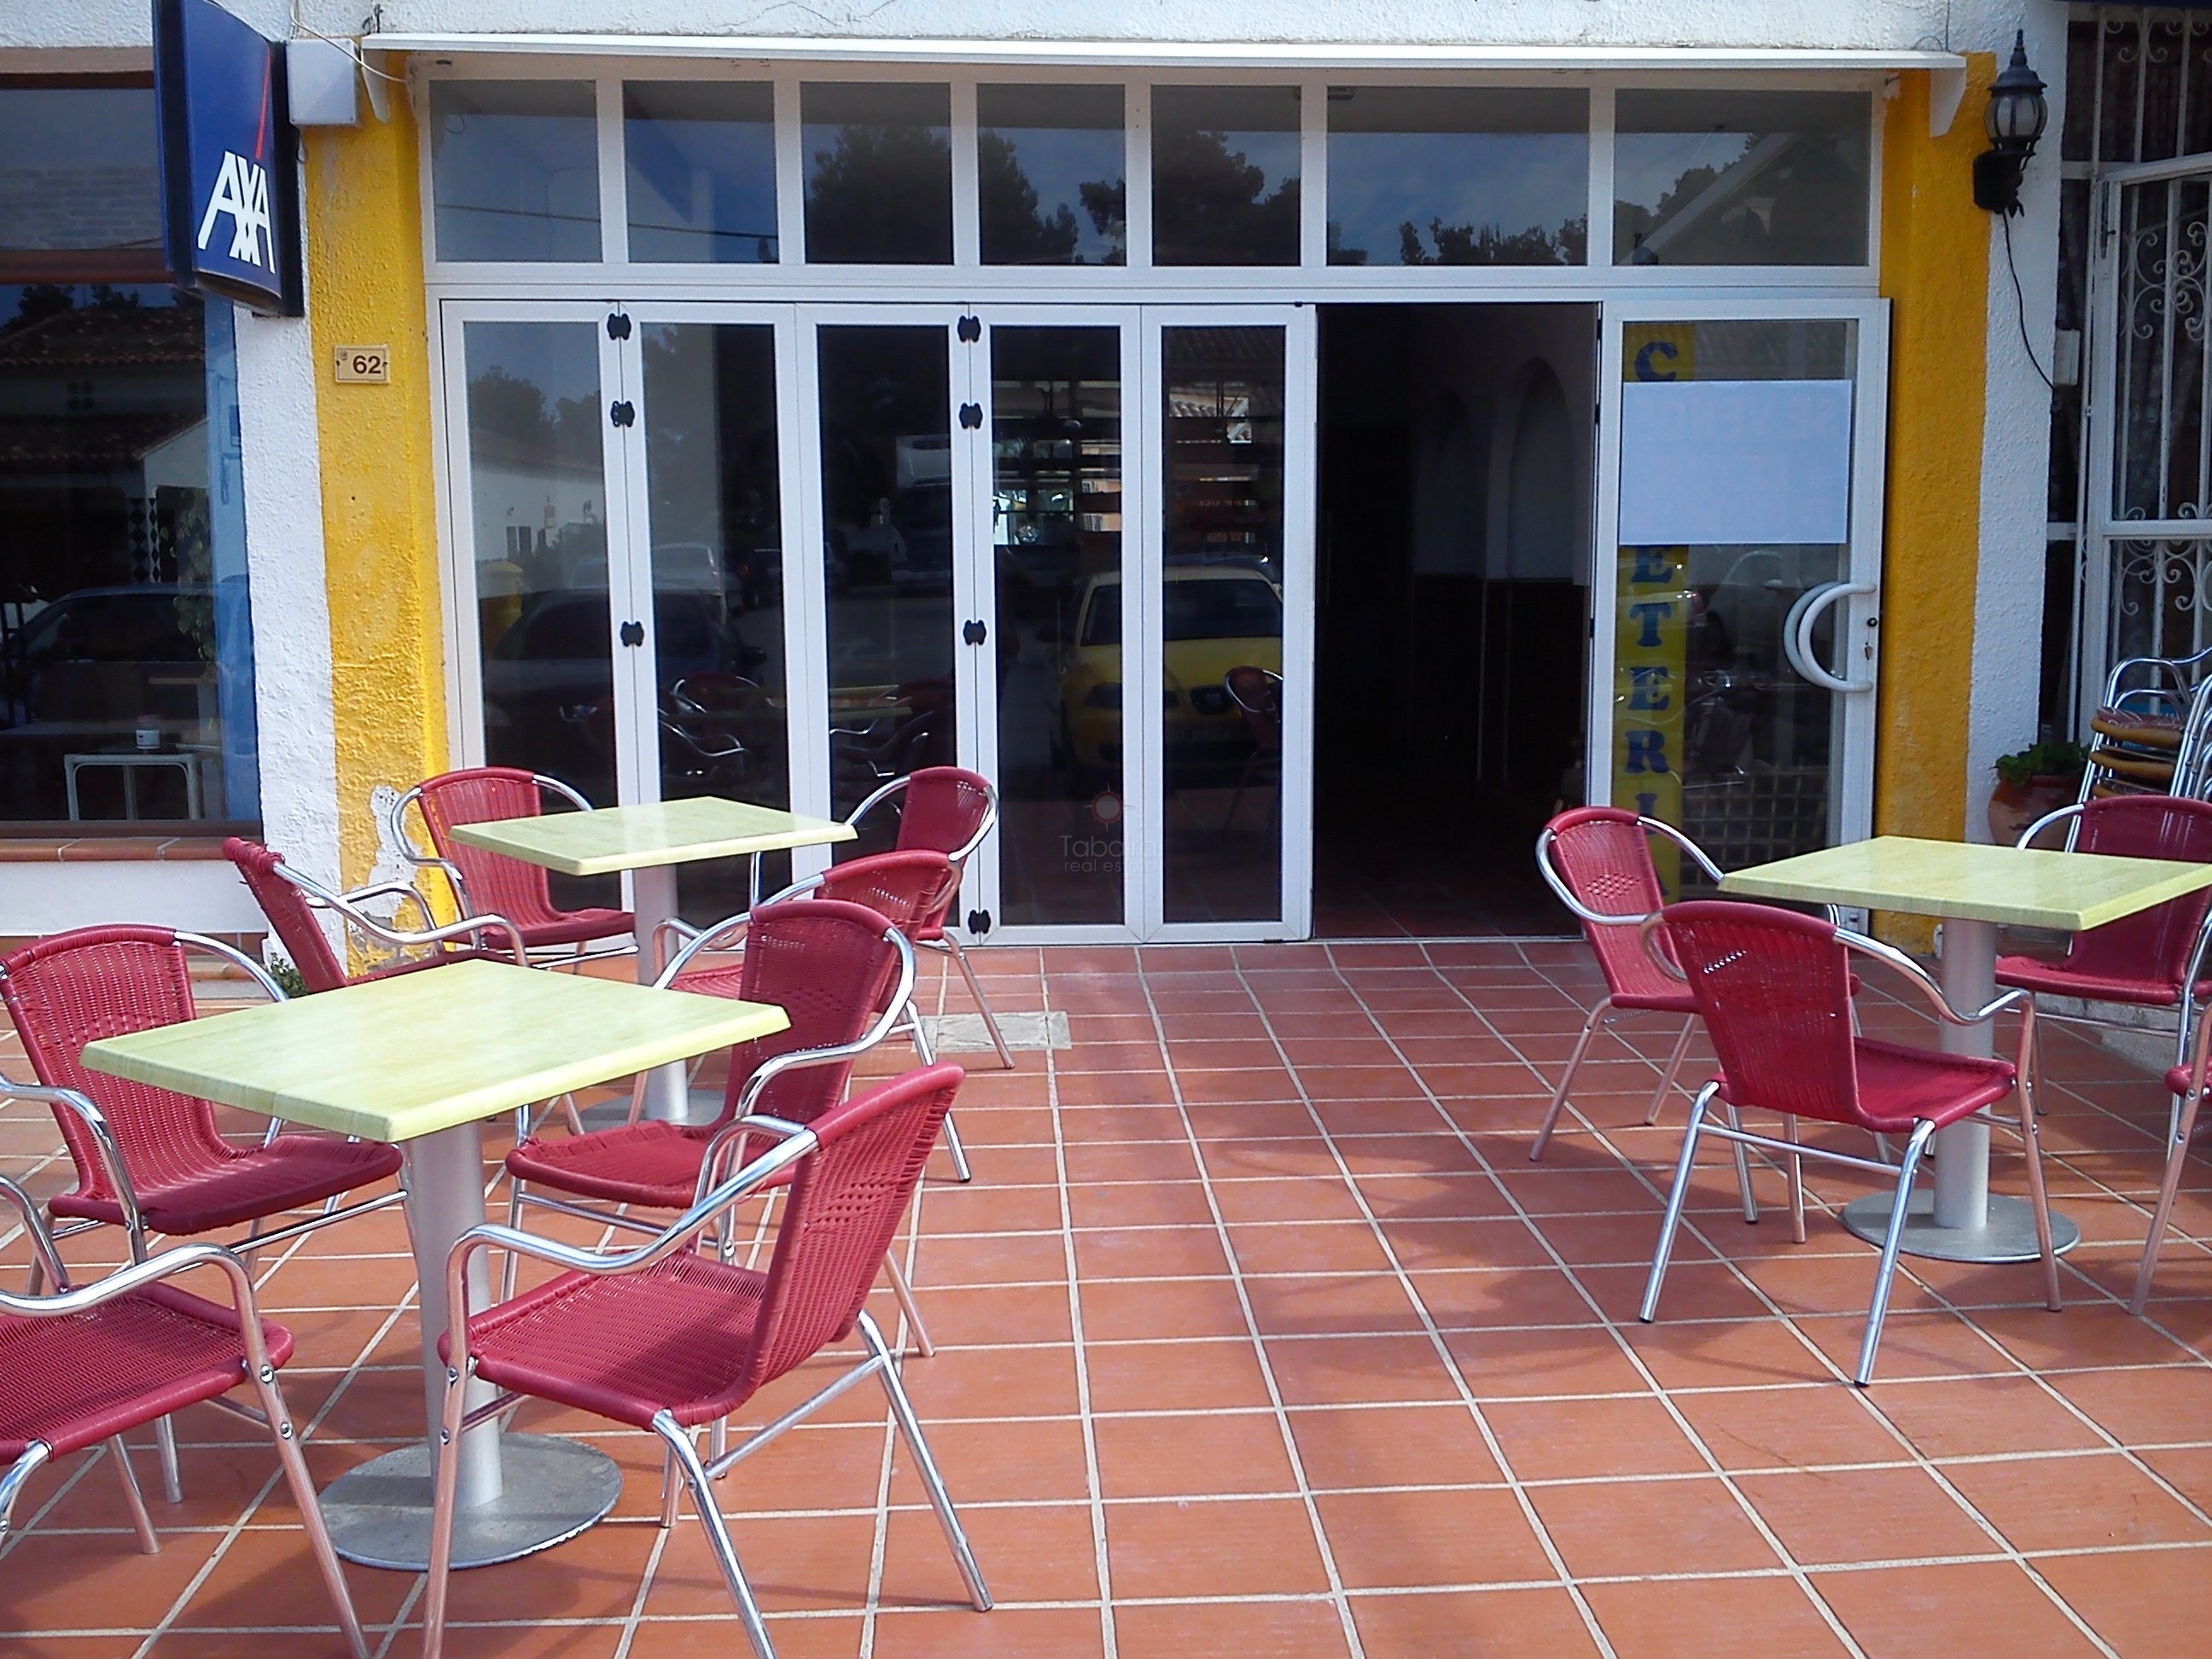 Commercial for sale in Moraira, Costa Blanca, Spain 327562434